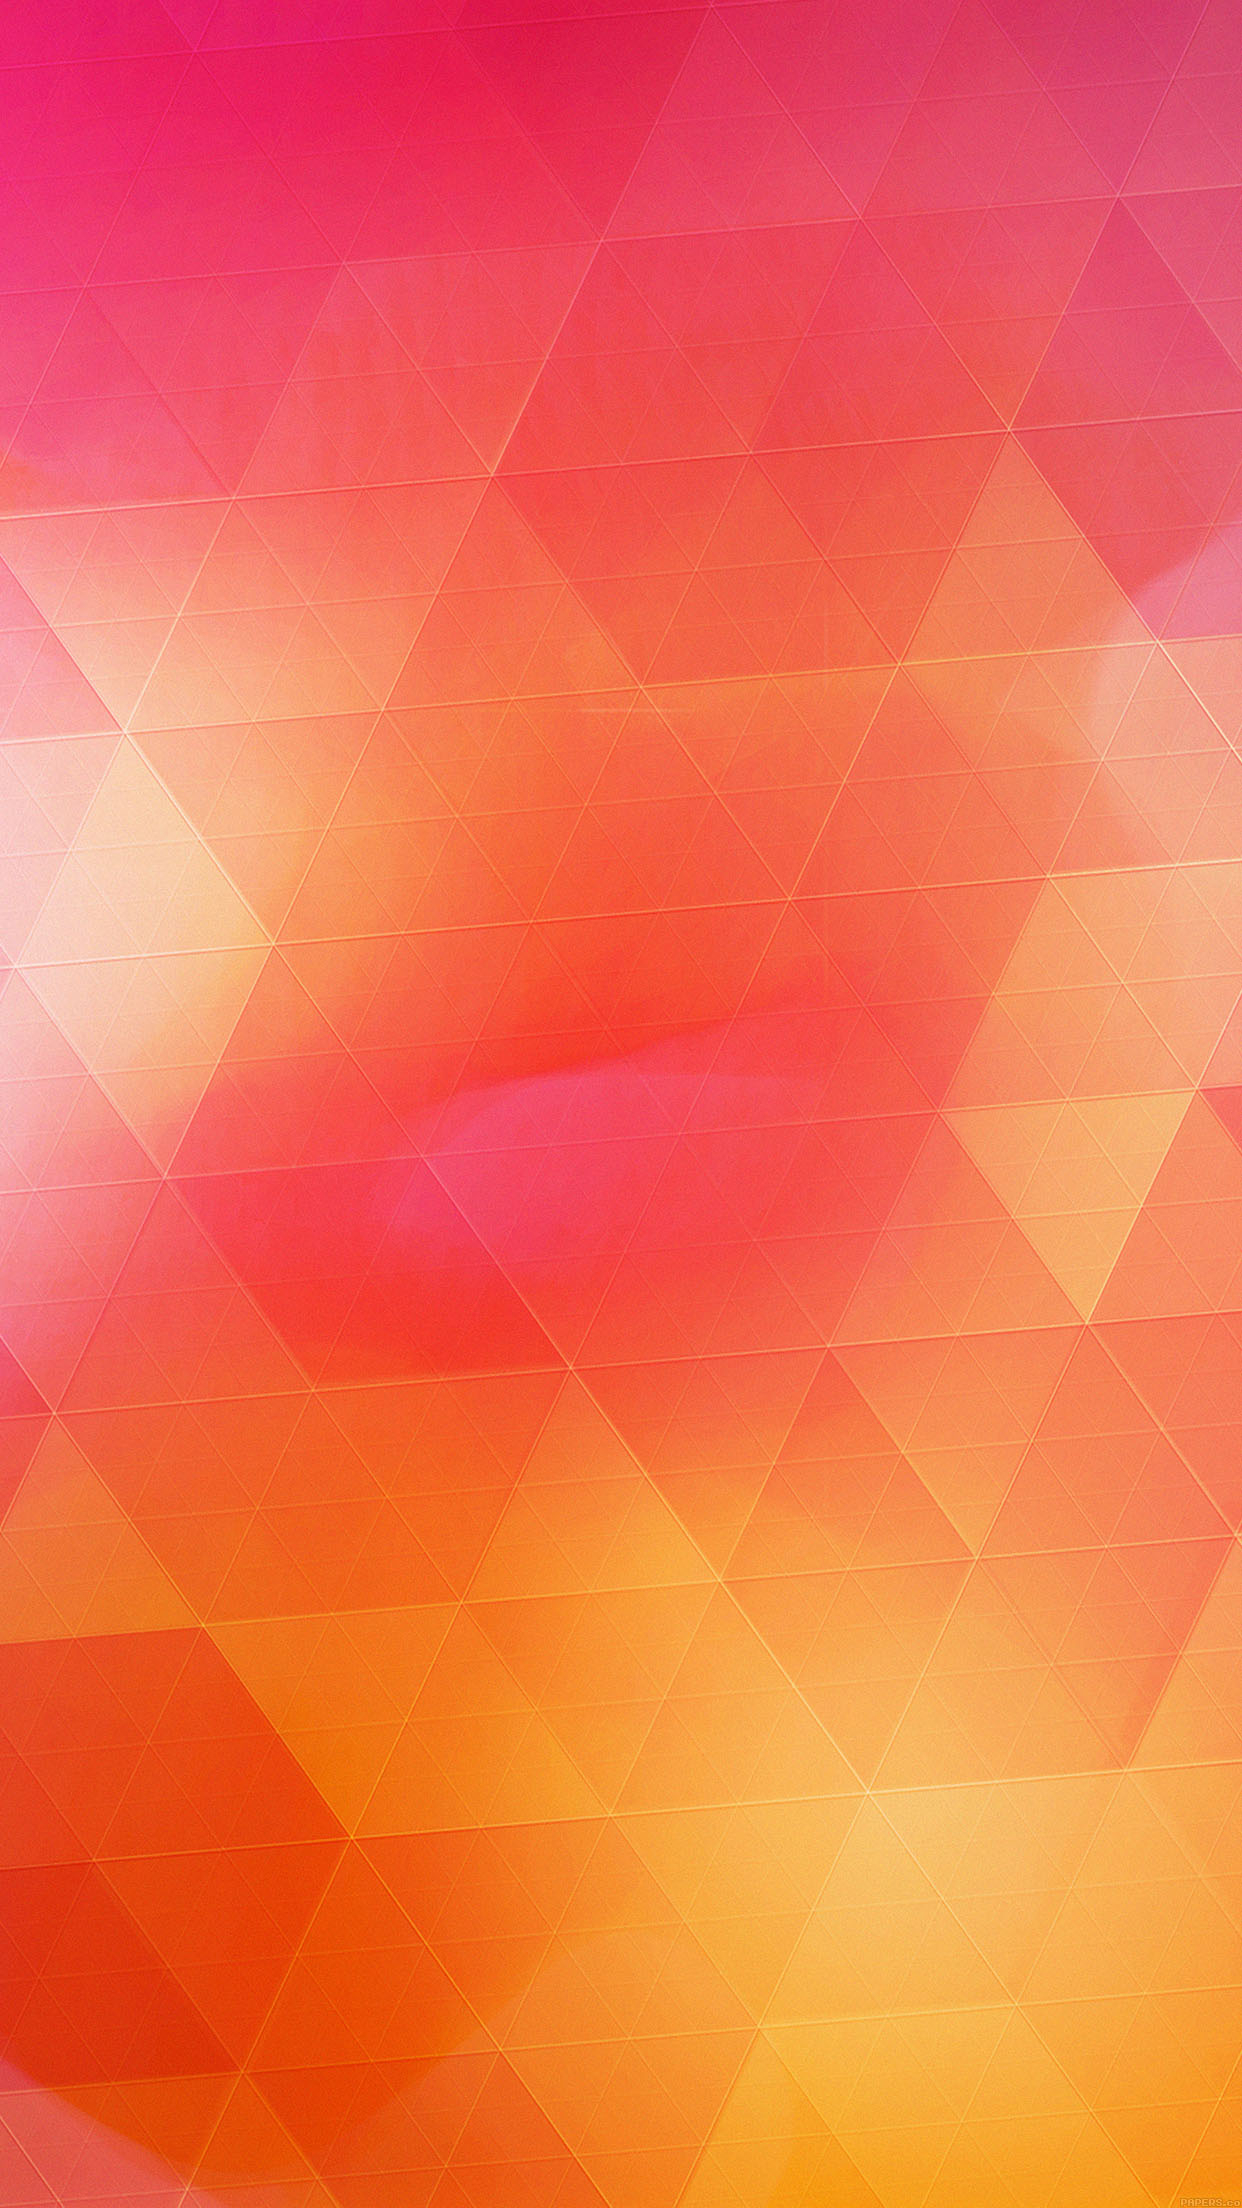 Wallpaper Android Wall Pattern Android wallpaper